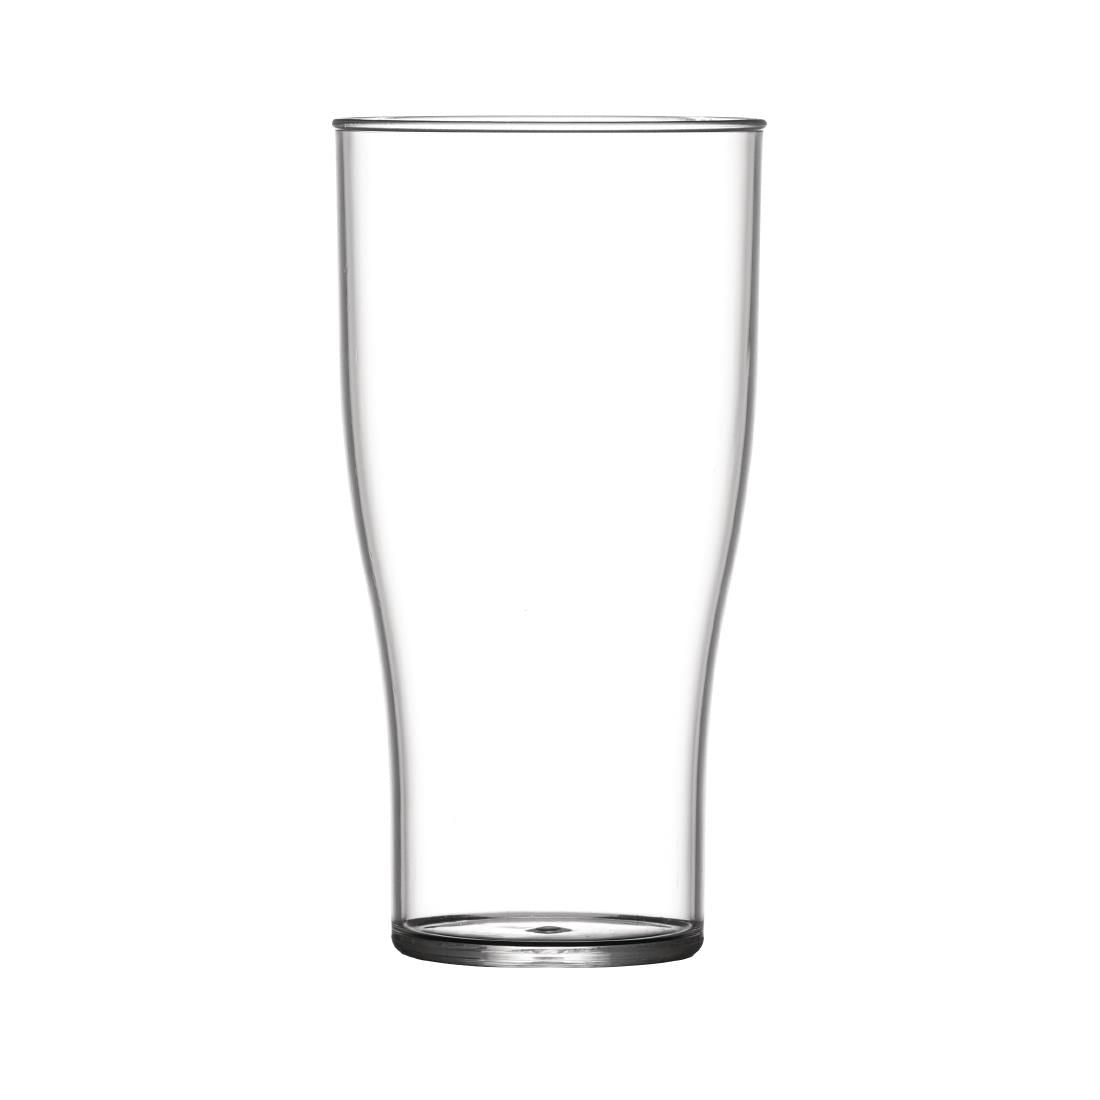 BBP Polycarbonate Nucleated Half Pint Glasses  CE Marked (Pack of 48) JD Catering Equipment Solutions Ltd